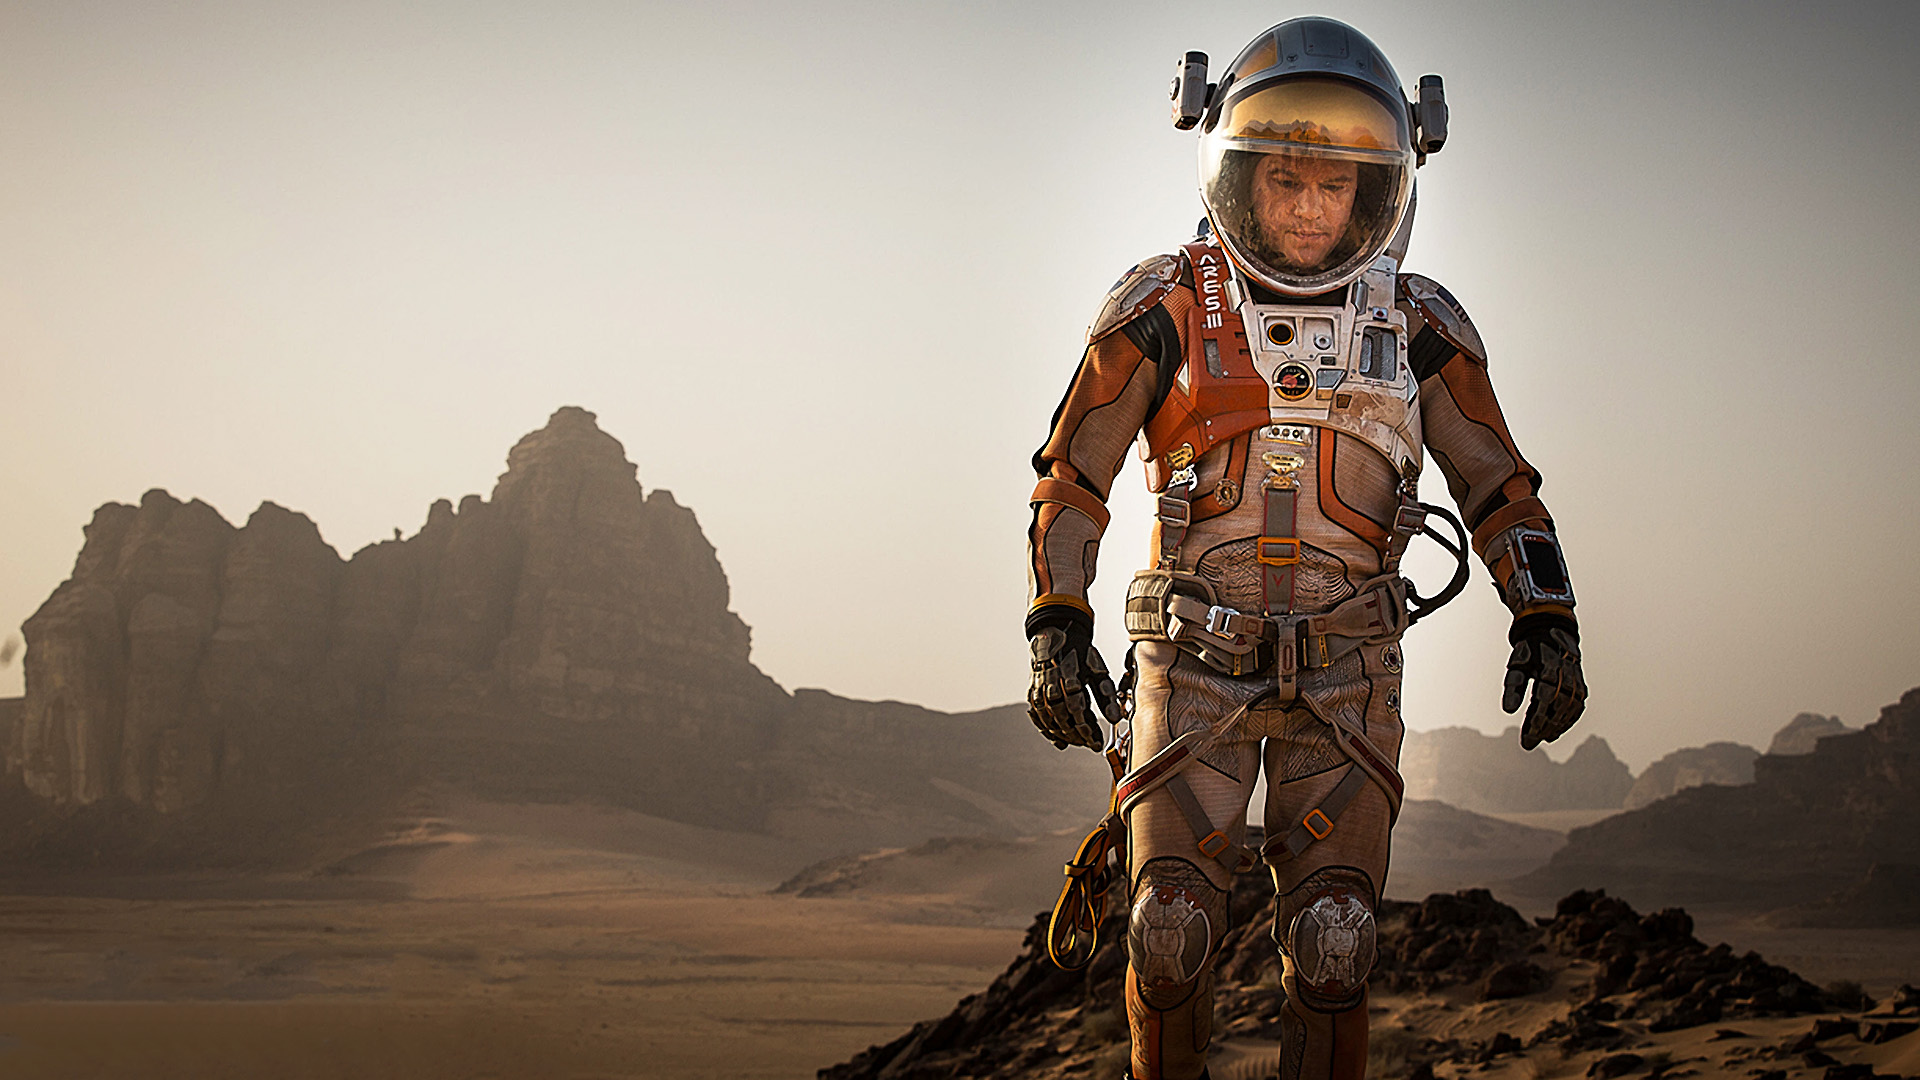 The Martian 2015 Movie Review Splatter On Film Images, Photos, Reviews